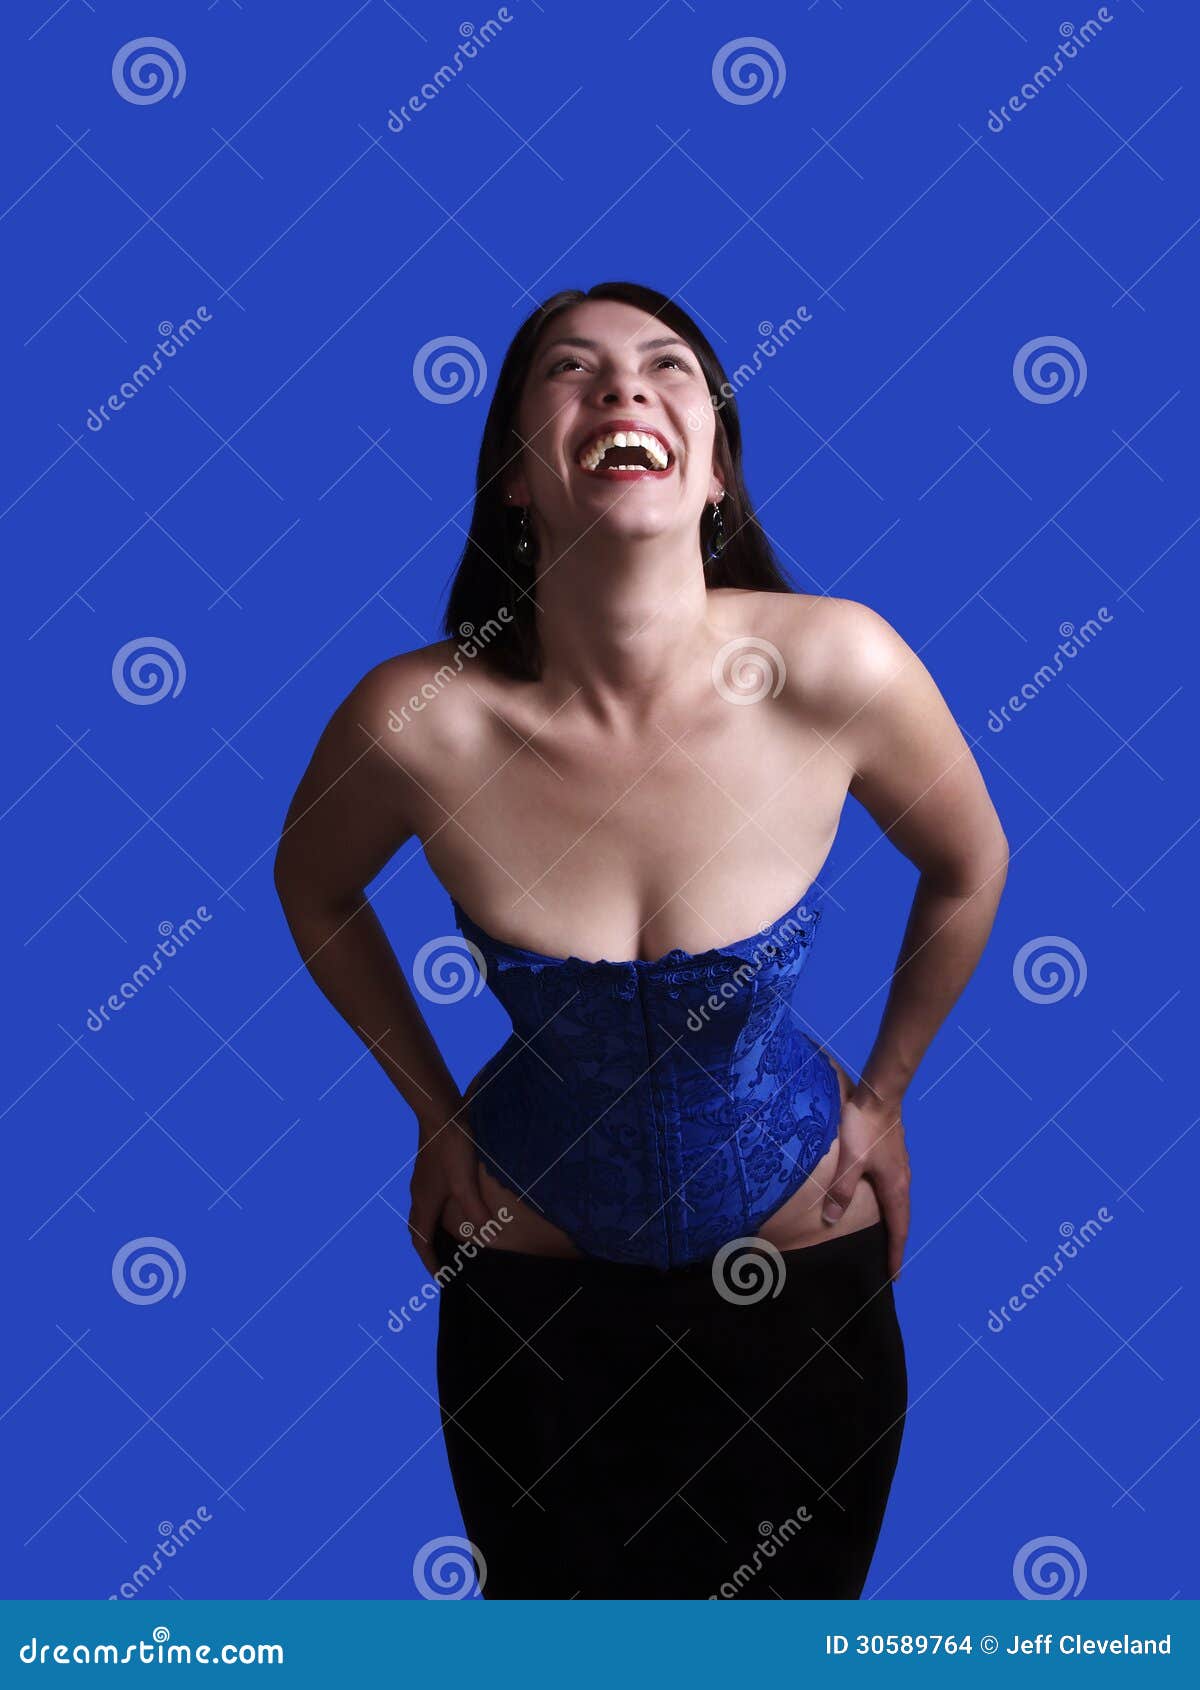 Smiling Woman In Blue Corset Skirt Pulled Down Stock Images Image 30589764